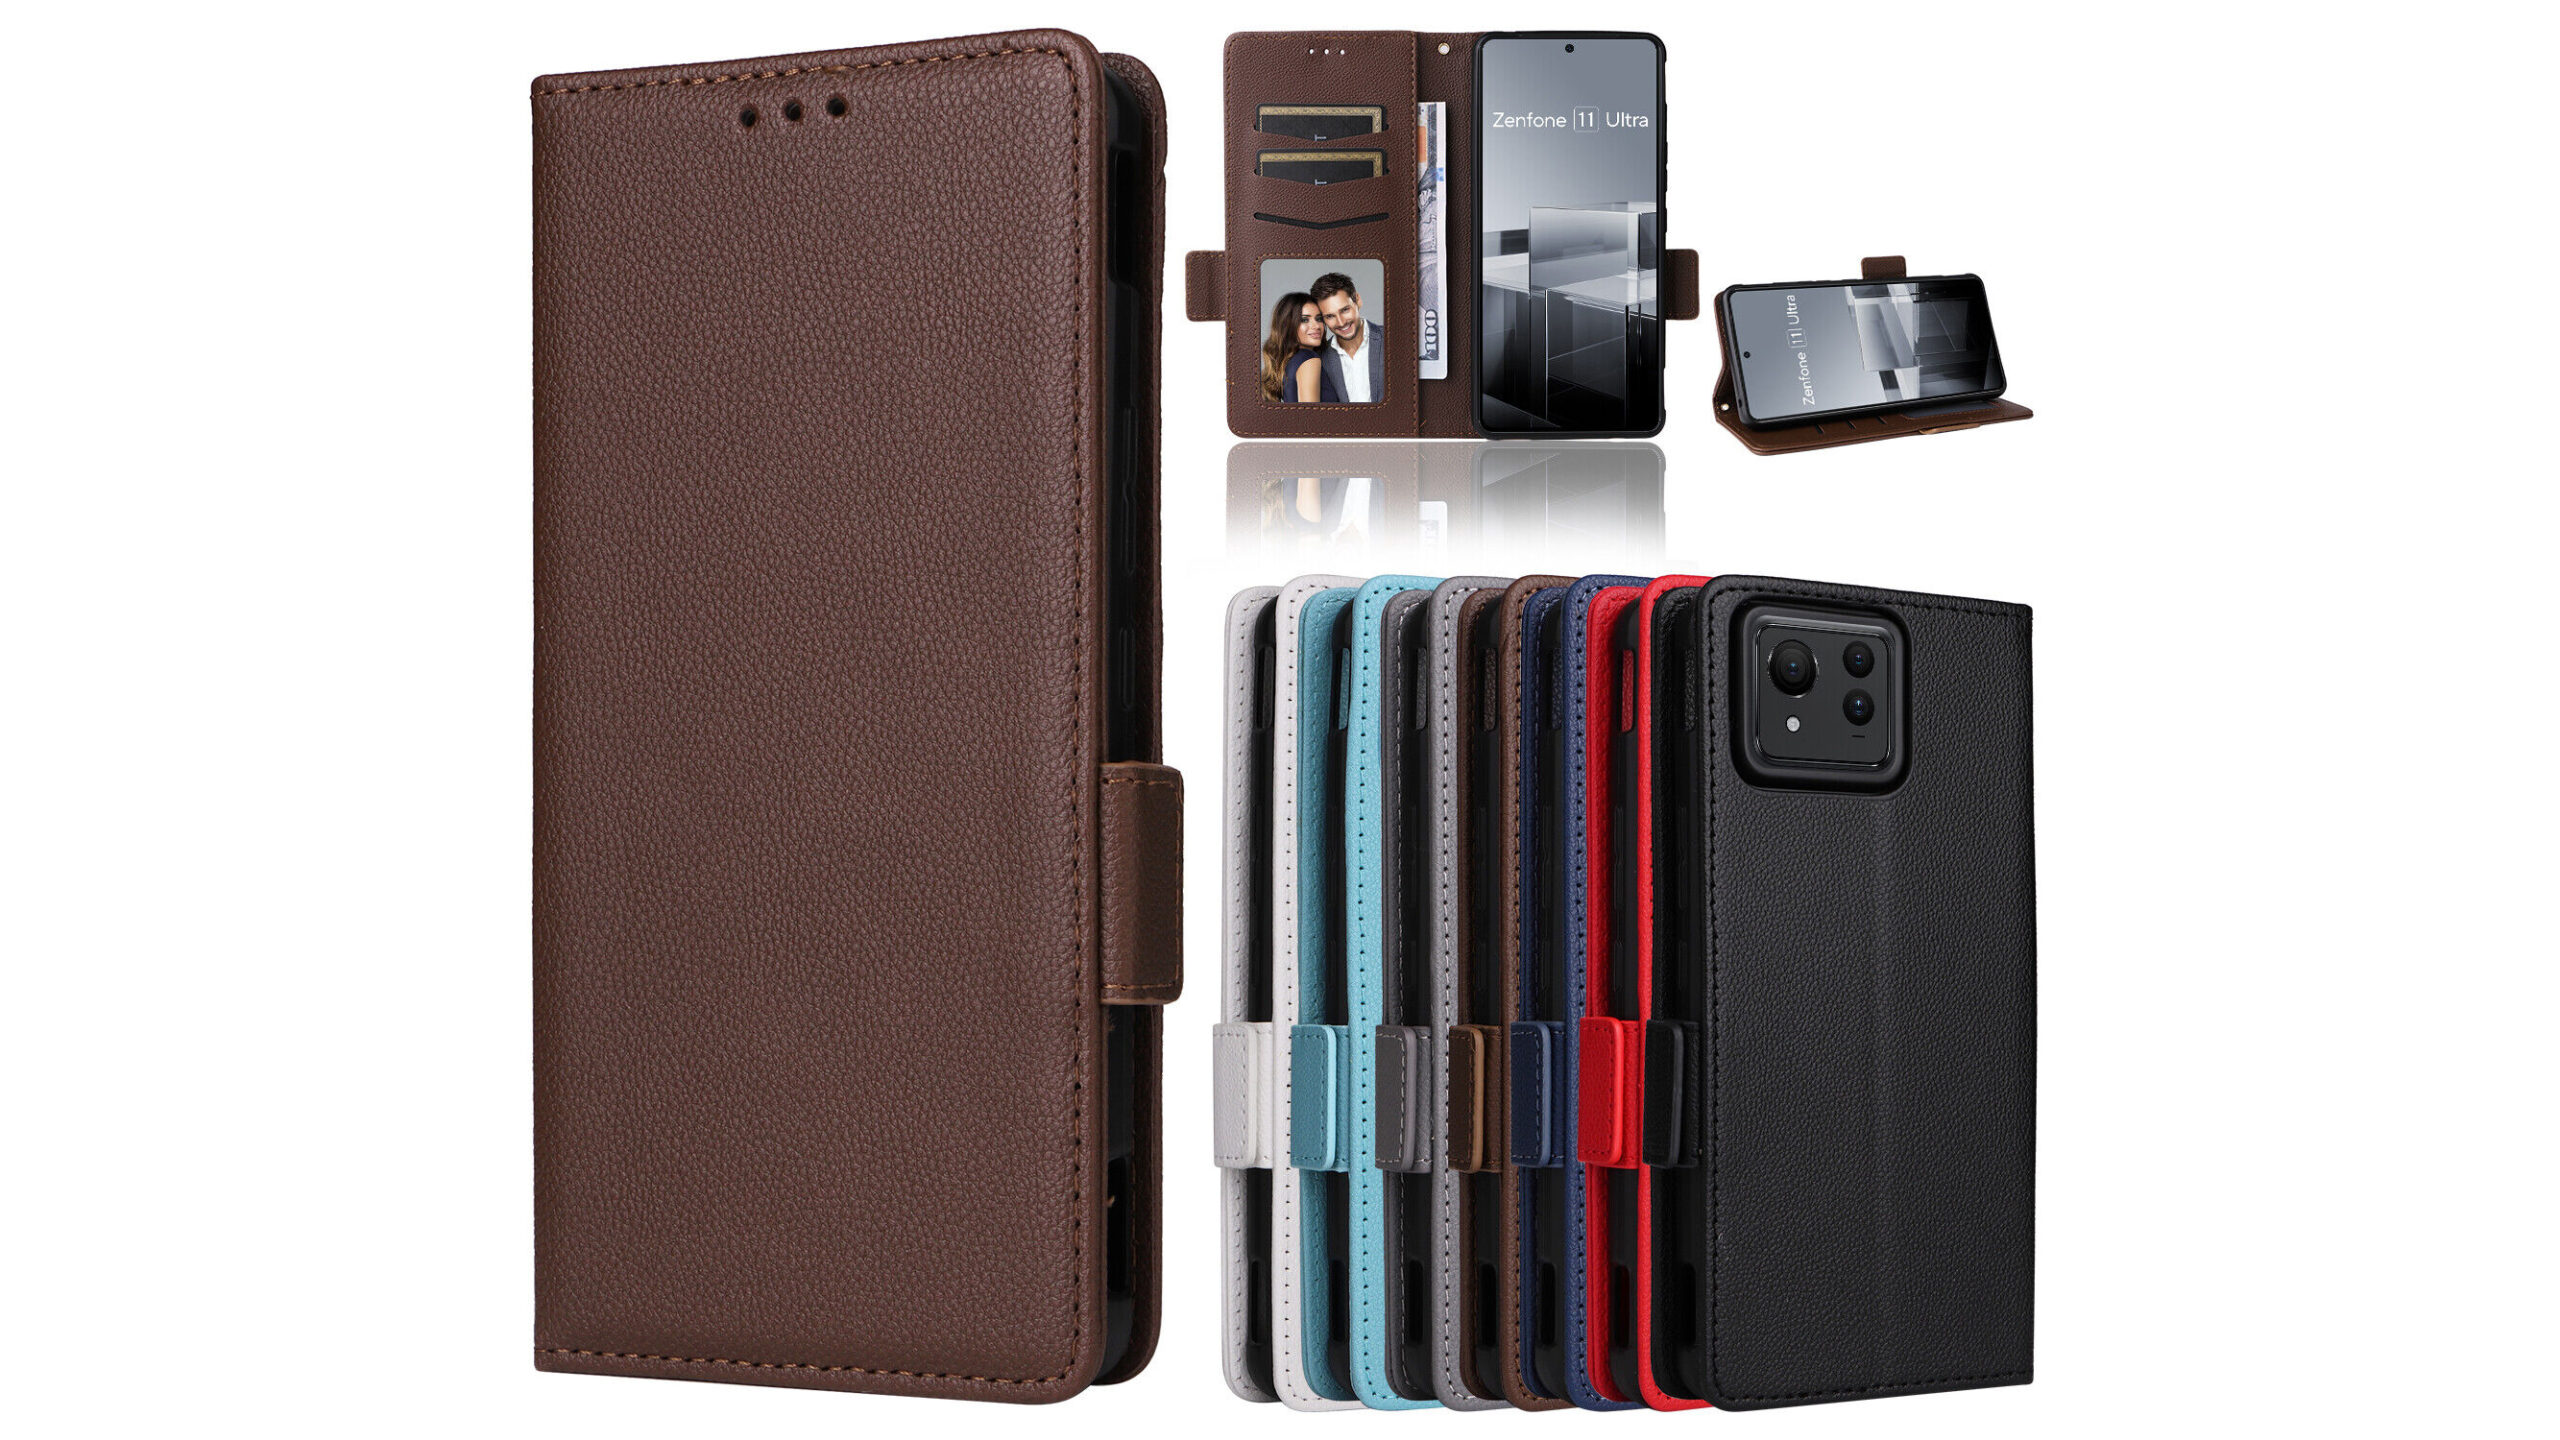 Luxury Classic PU Leather Wallet Cover for ASUS Zenfone 11 Ultra